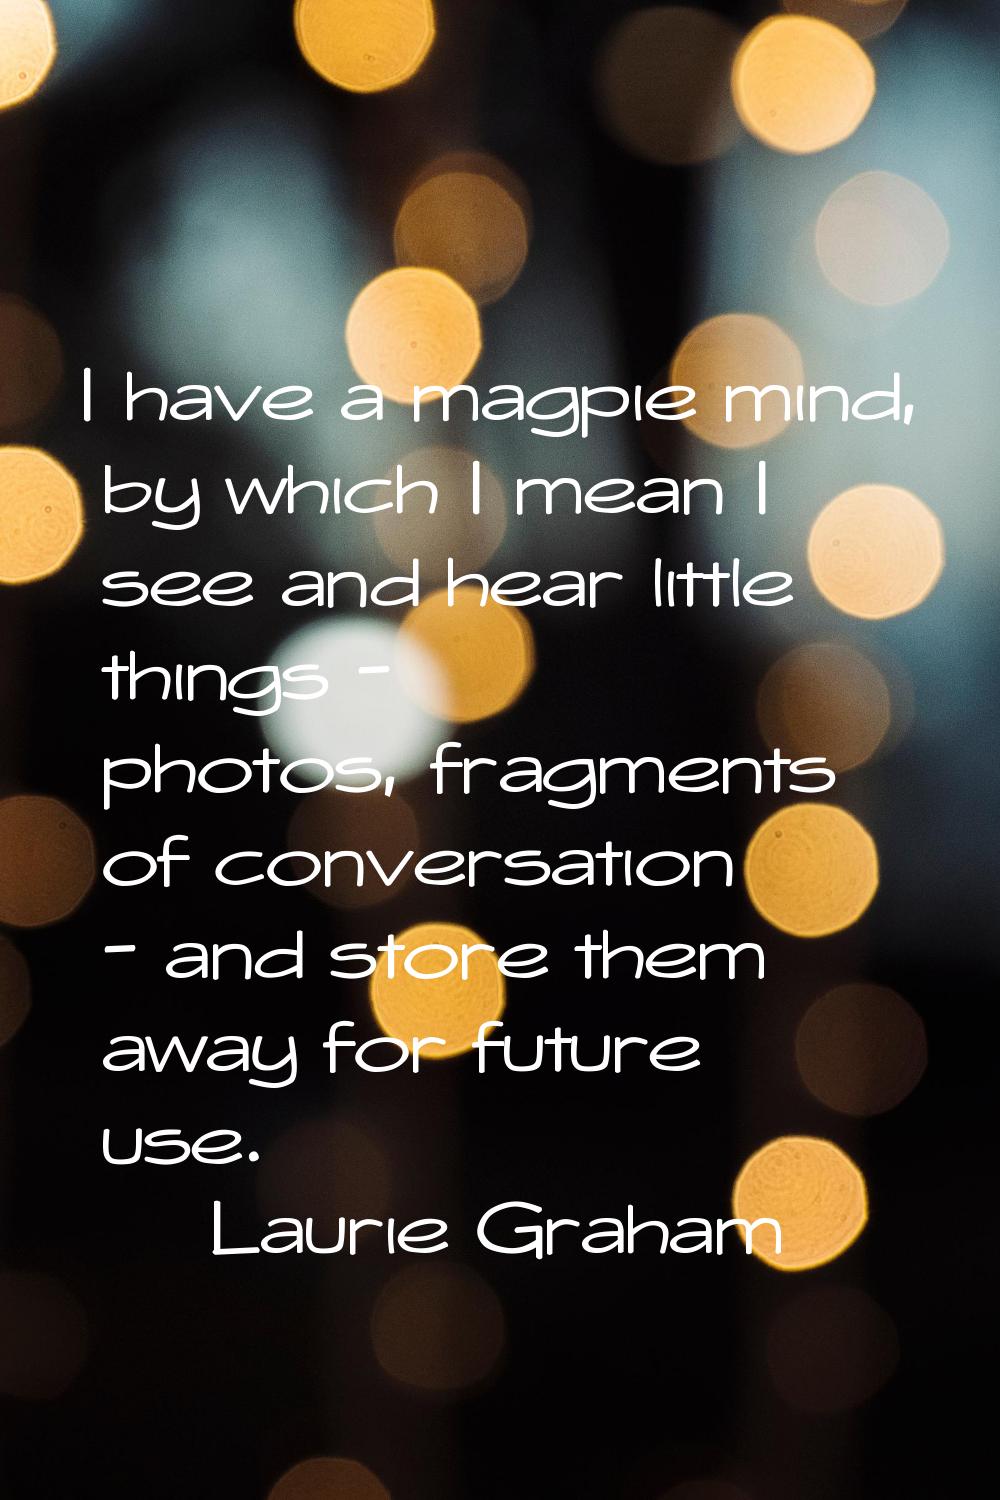 I have a magpie mind, by which I mean I see and hear little things - photos, fragments of conversat